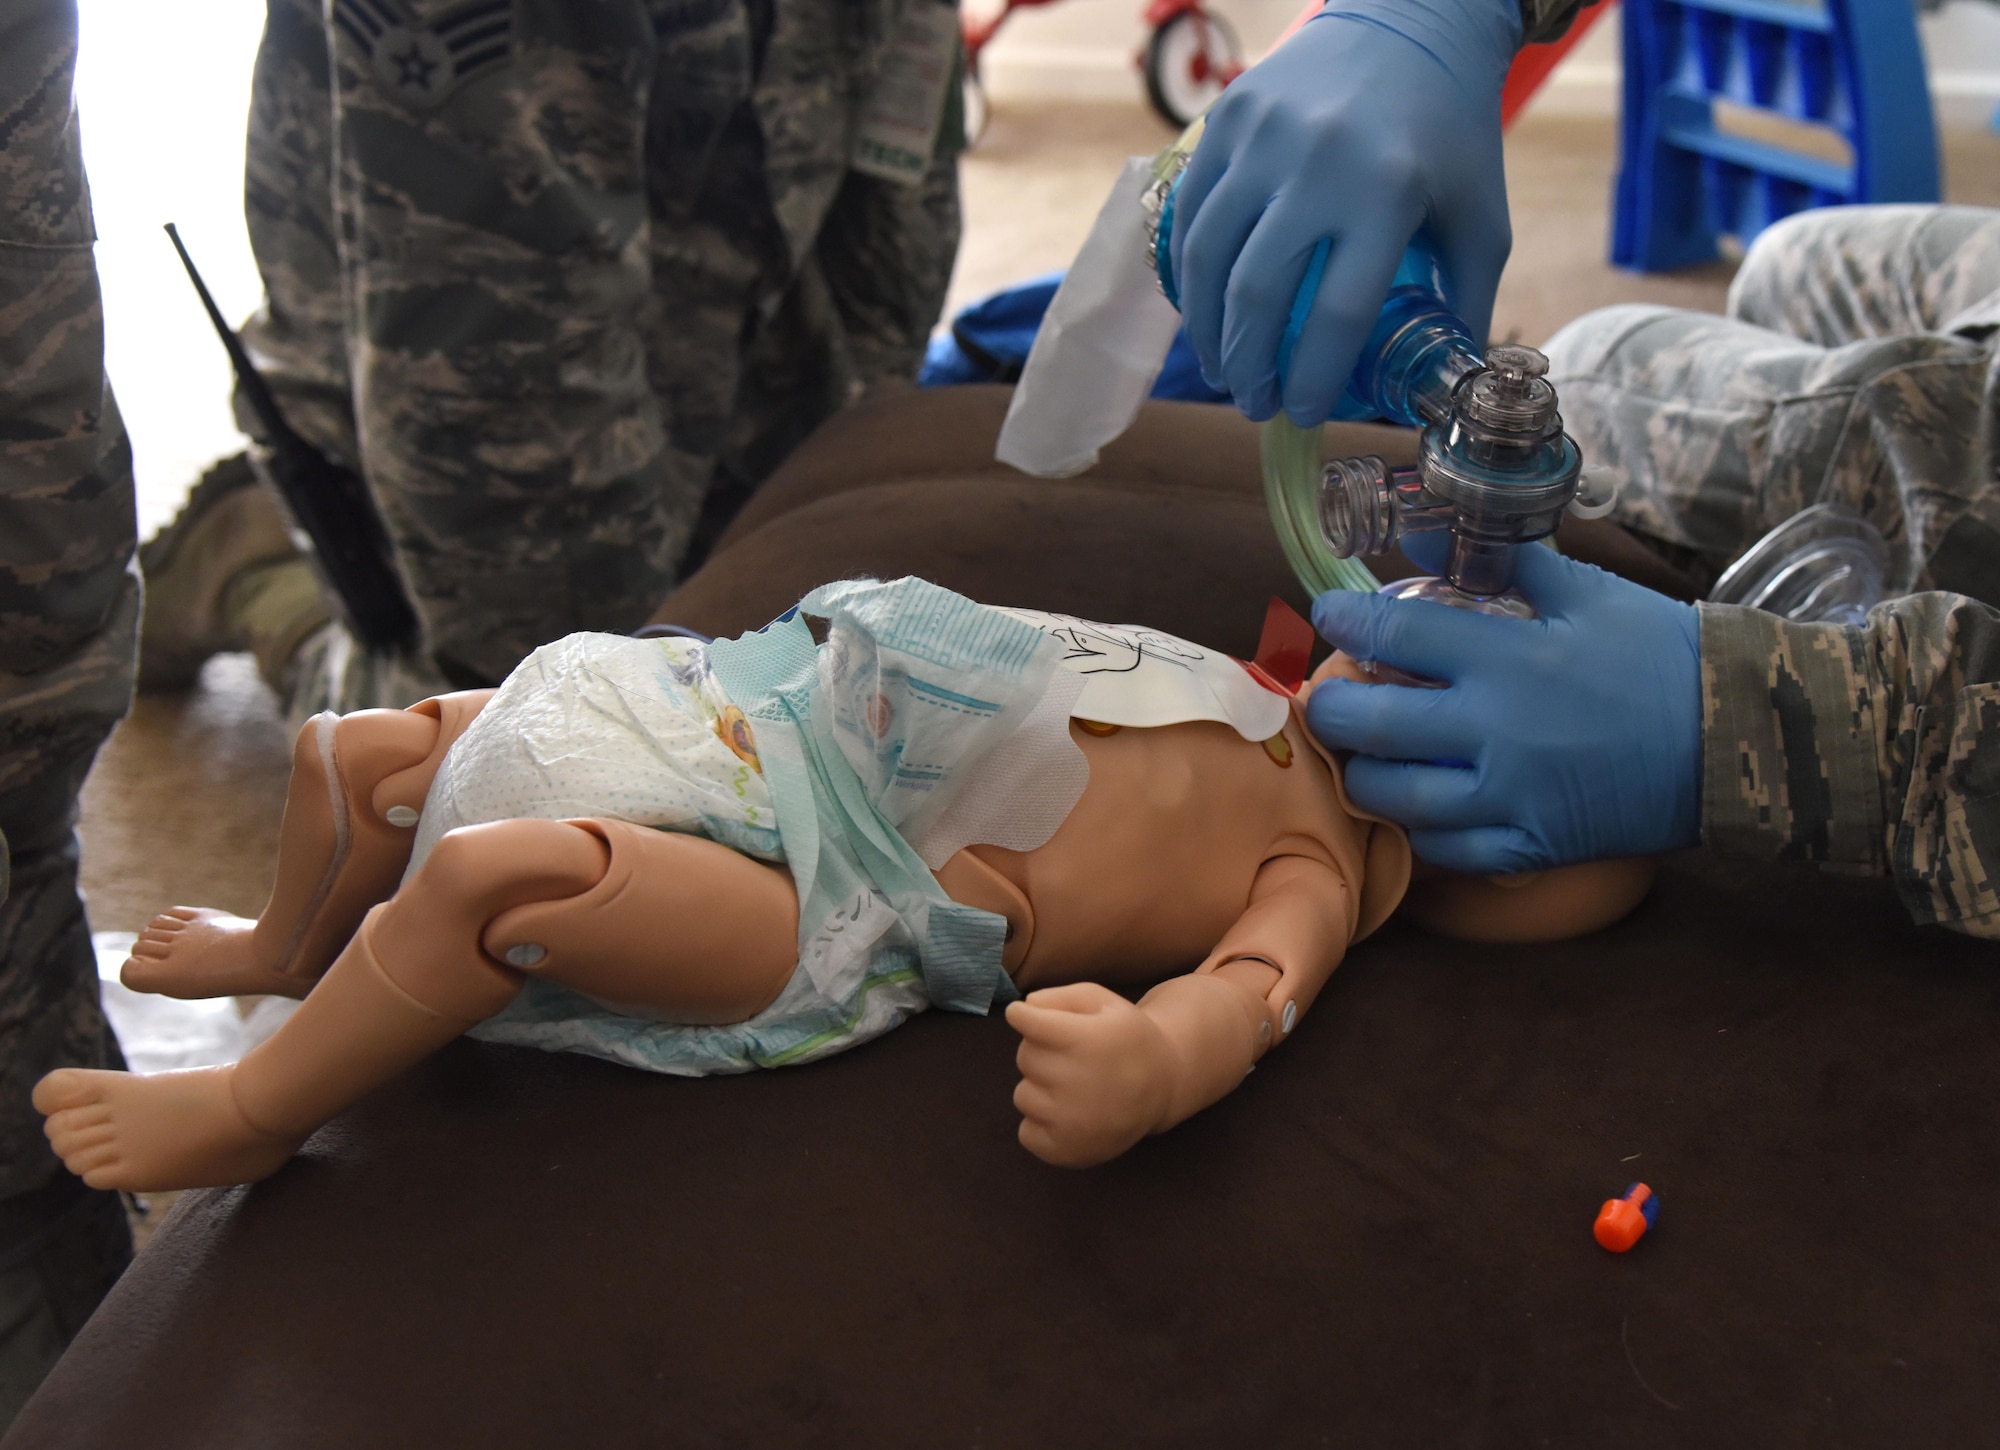 Airman 1st Class Andrew Frost, 81st Medical Operations Squadron medical technician, simulate cardiopulmonary resuscitation on an infant “patient” found unresponsive during a medical emergency scenario in East Falcon subdivision May 24, 2017, in Biloxi, Miss. Emergency room staff members coordinated with the simulation lab to use human patient simulators for running various advanced cardiac life support scenarios to improve Keesler’s new medical technicians’ skills and get them familiar with emergency equipment. (U.S. Air Force photo by Kemberly Groue)